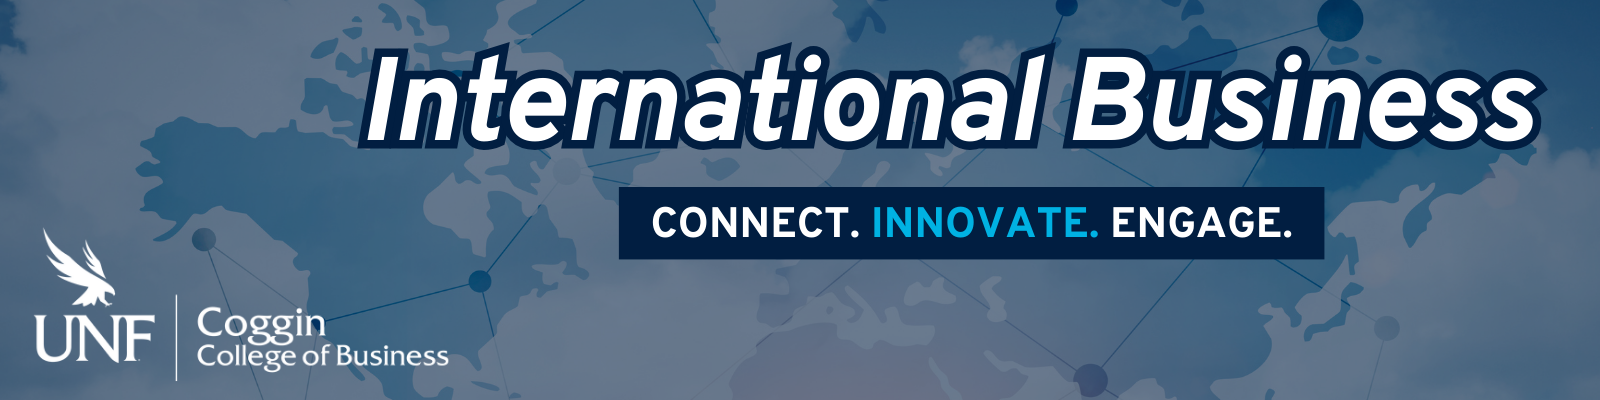 UNF Coggin College of Business logo International Business Connect Innovate Engage